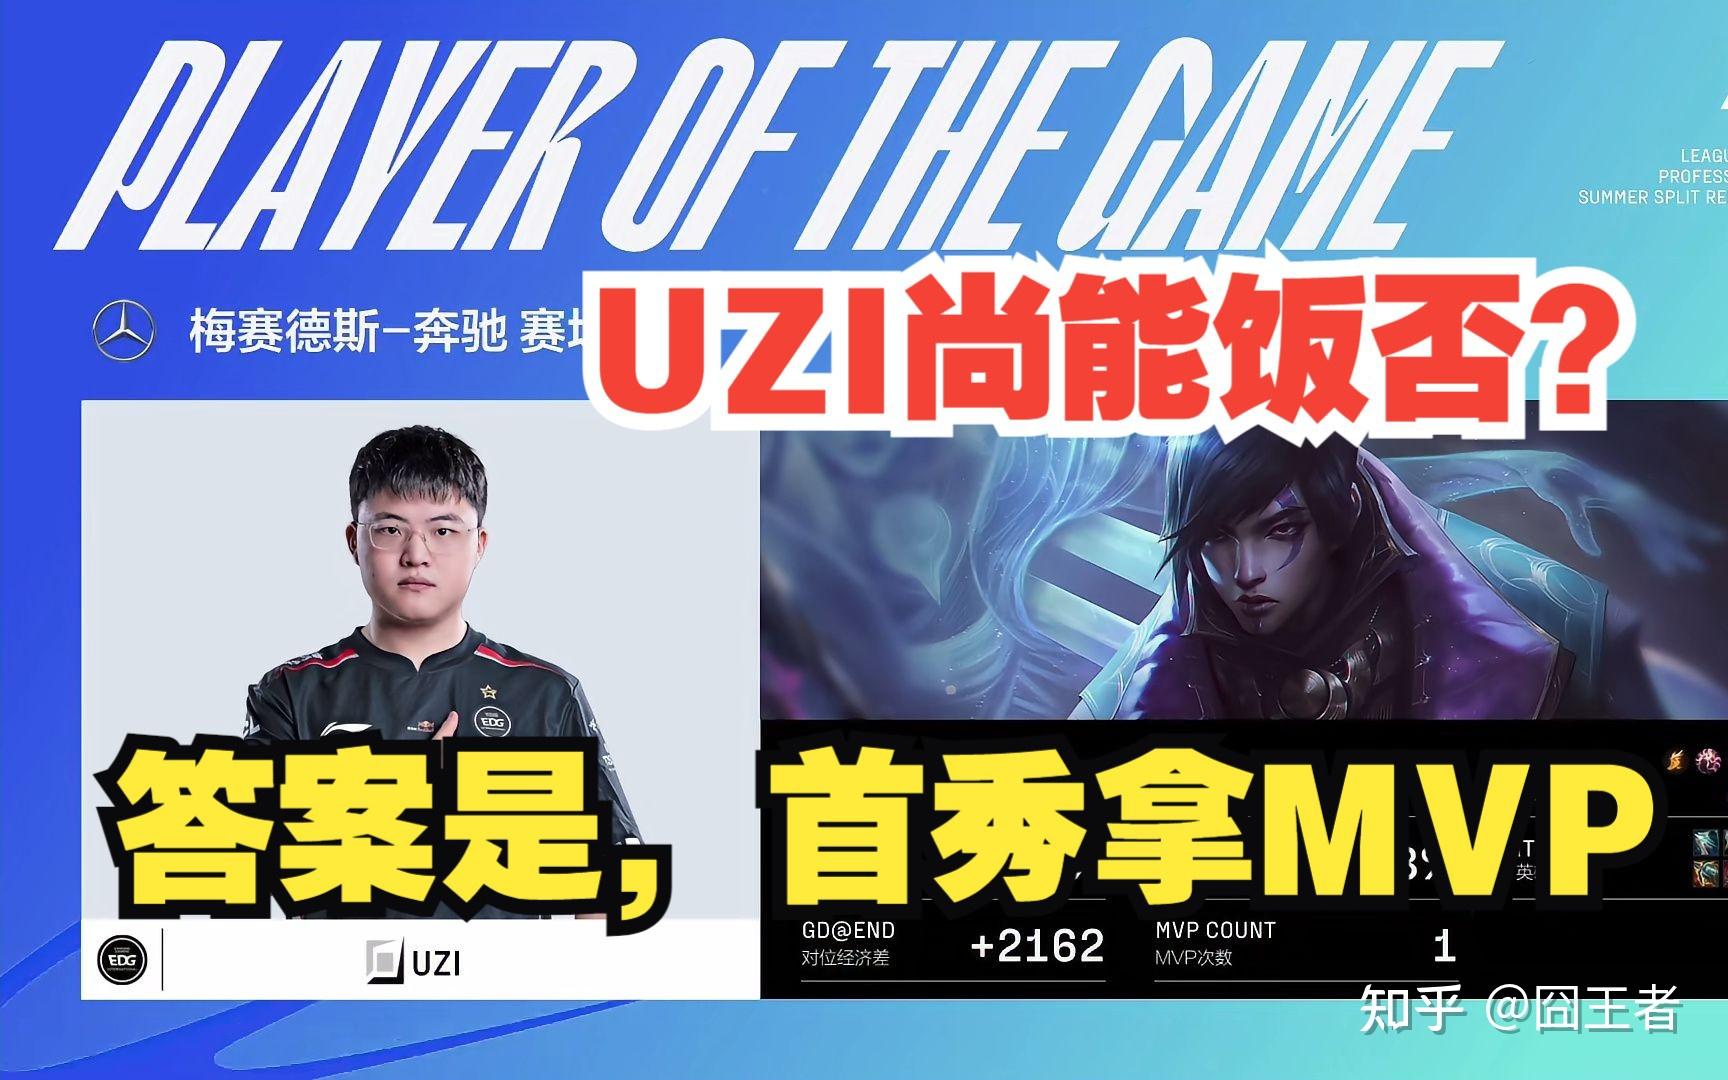 GALA confirms that EDG and Uzi will be a very strong team in the next ...